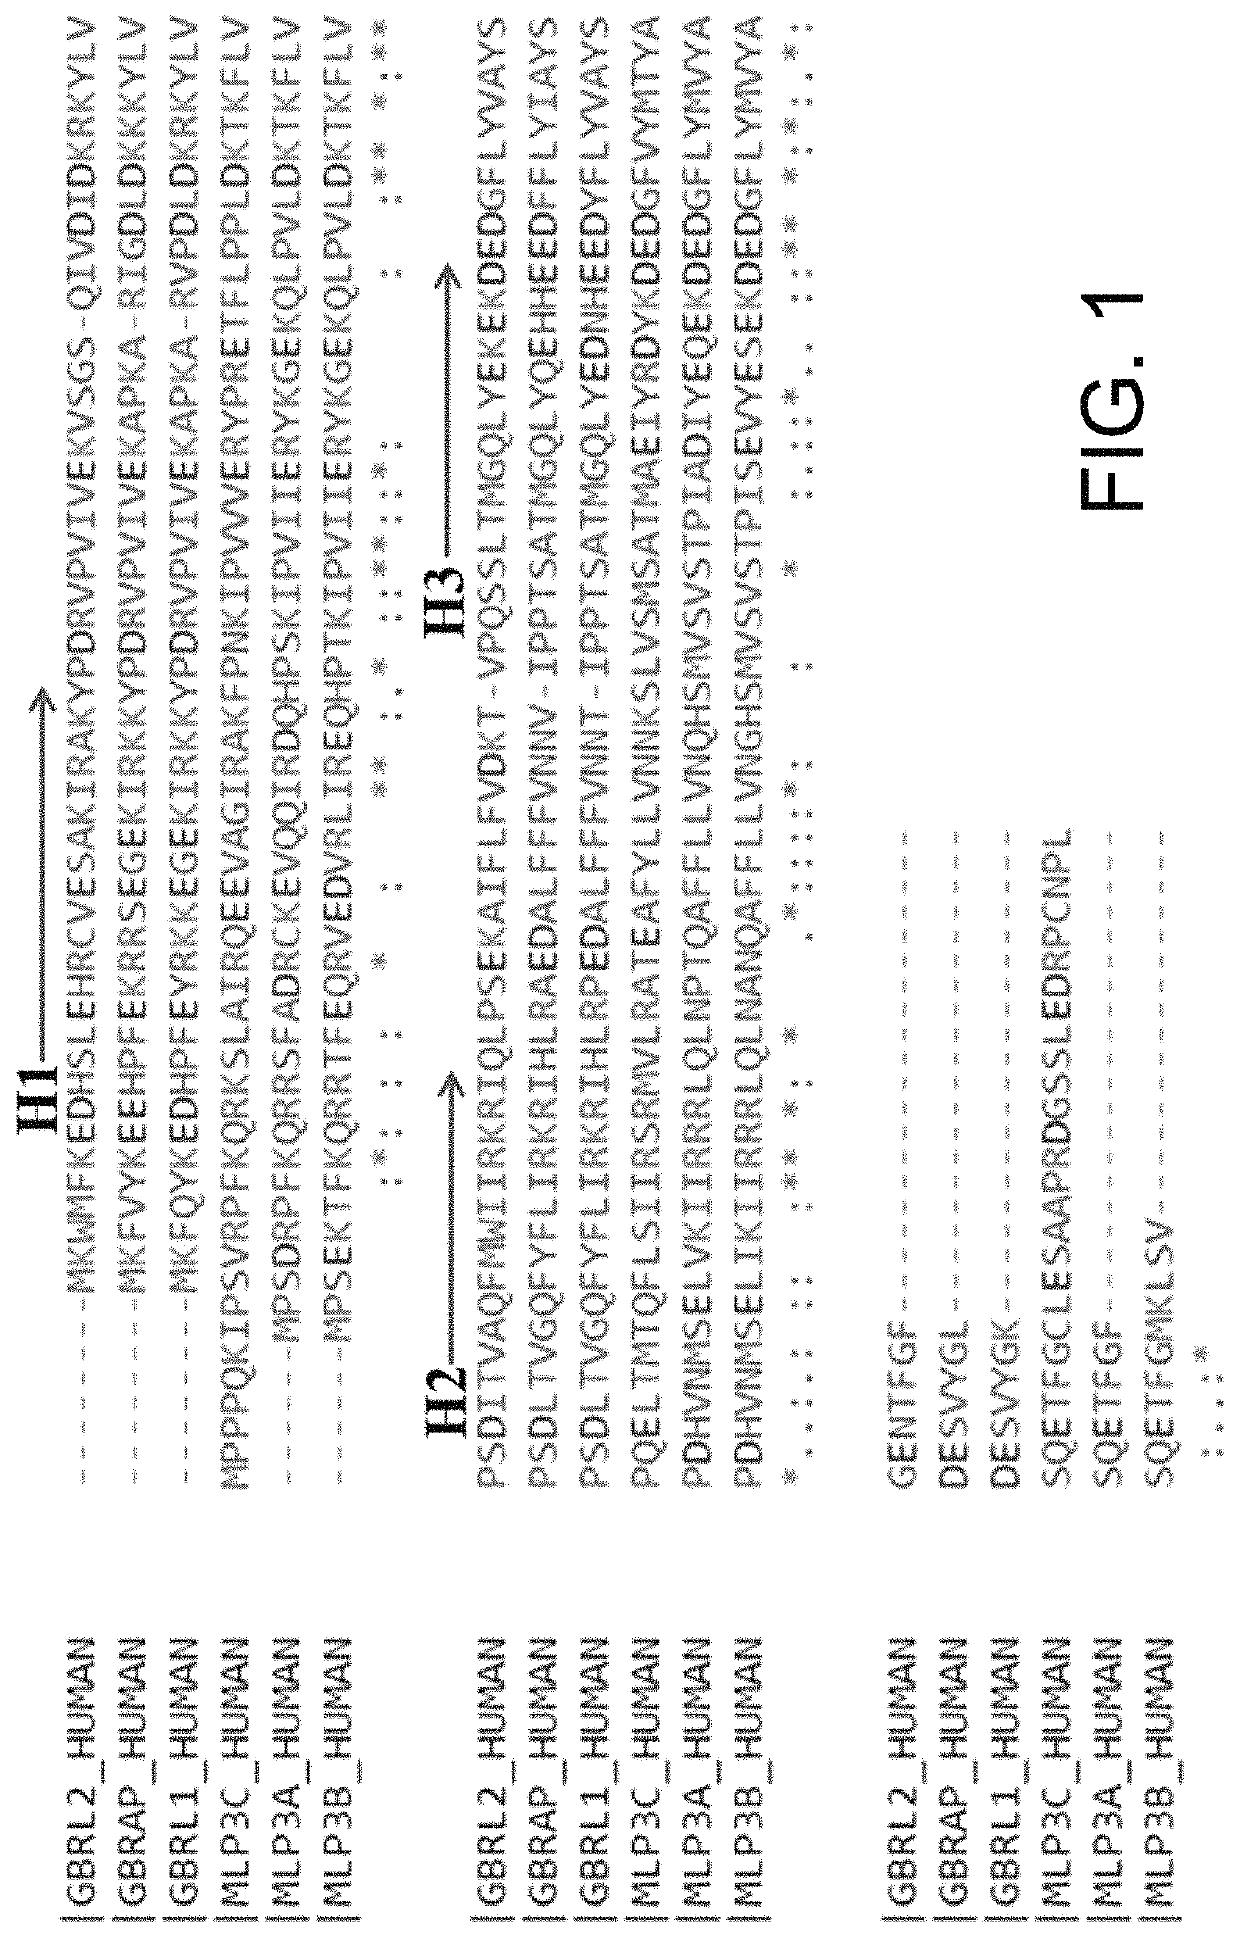 Isolated peptide, anti-cancer medicinal composition including the same and method of specifically reducing or inhibiting activities of cancer cells using the same